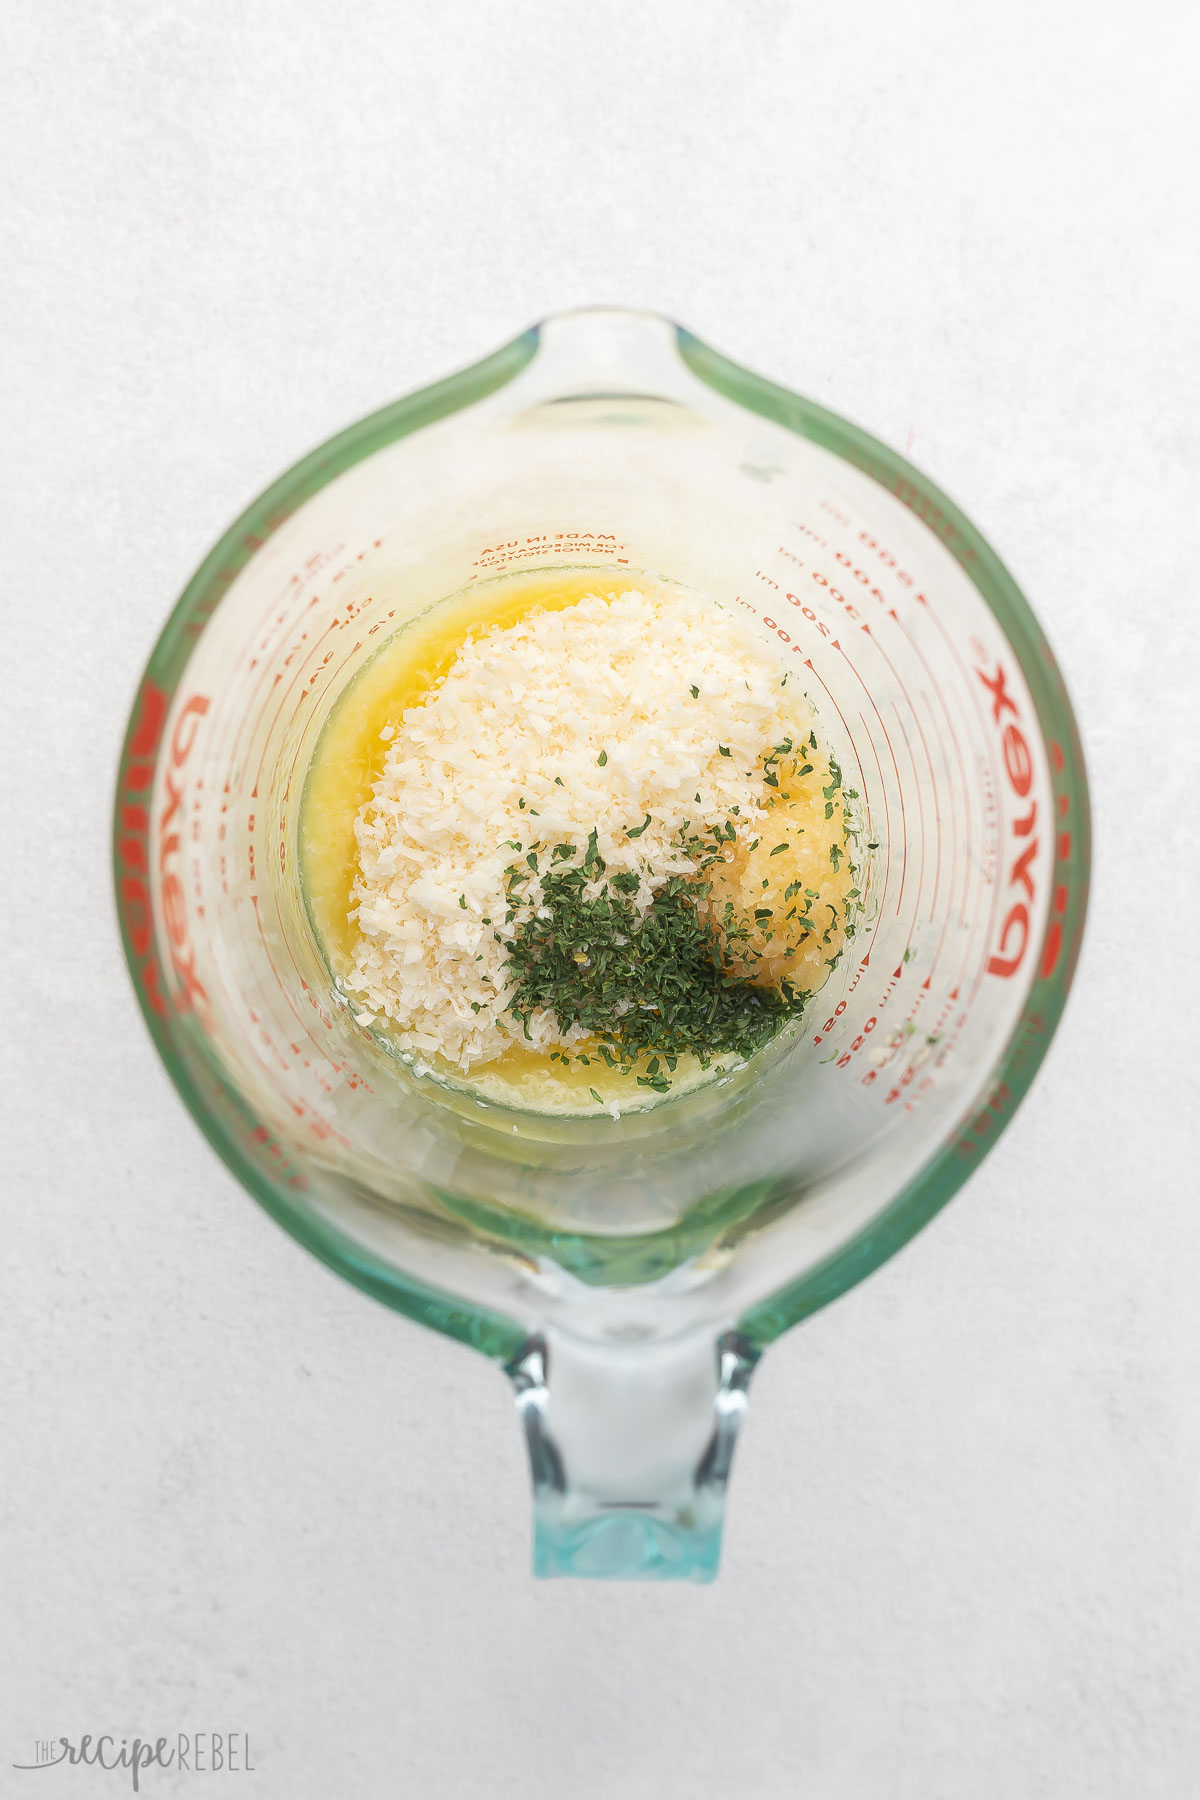 Garlic Parmesan Sauce ingredients (melted butter, parmesan, garlic, and parsley) in a glass mixing jug.